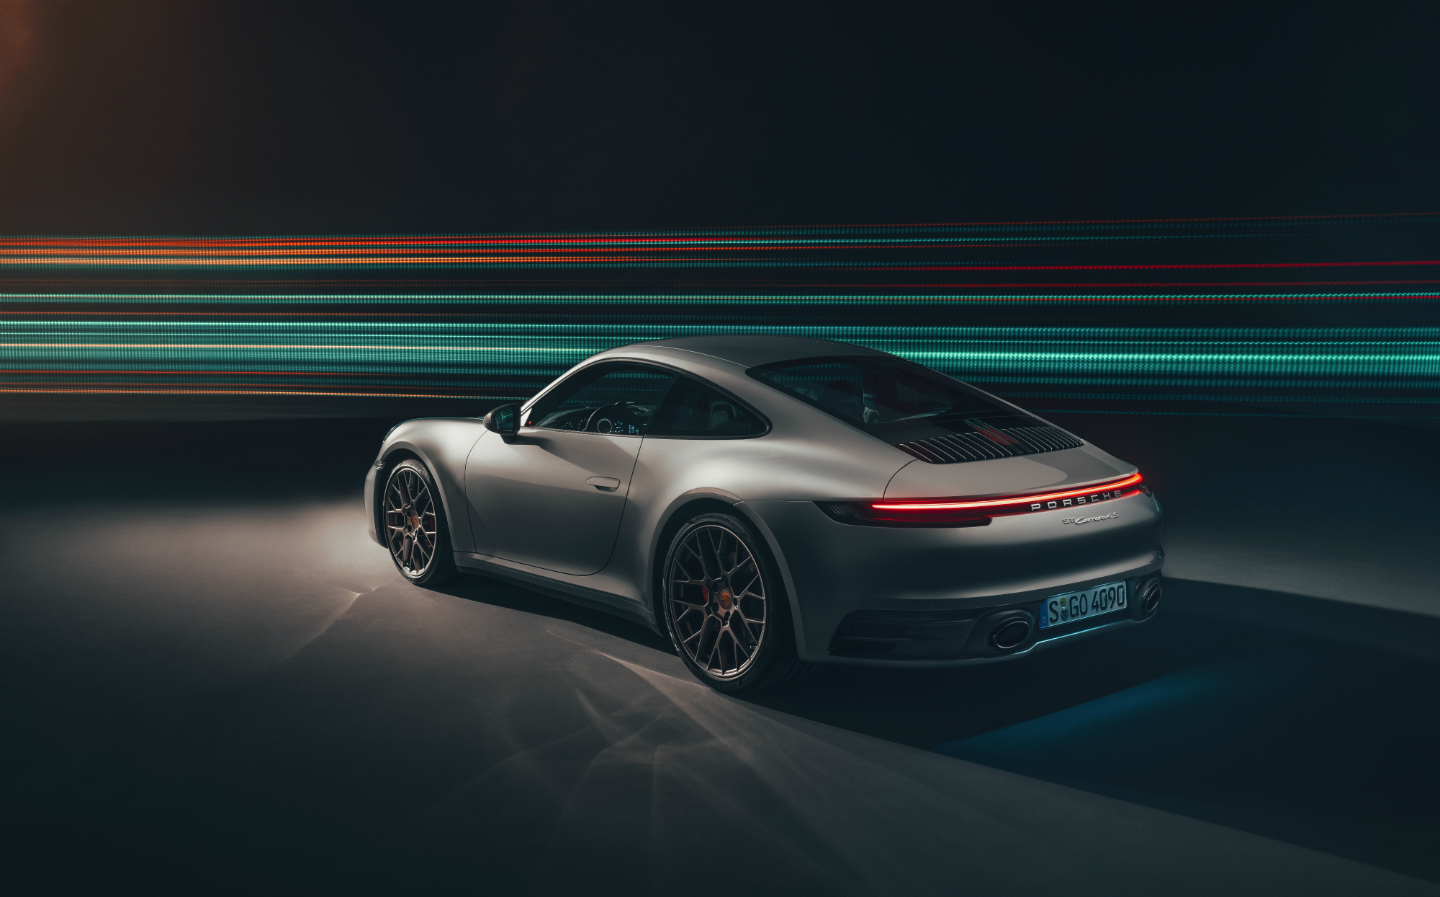 2019 Porsche 911: prices, power, specs and images